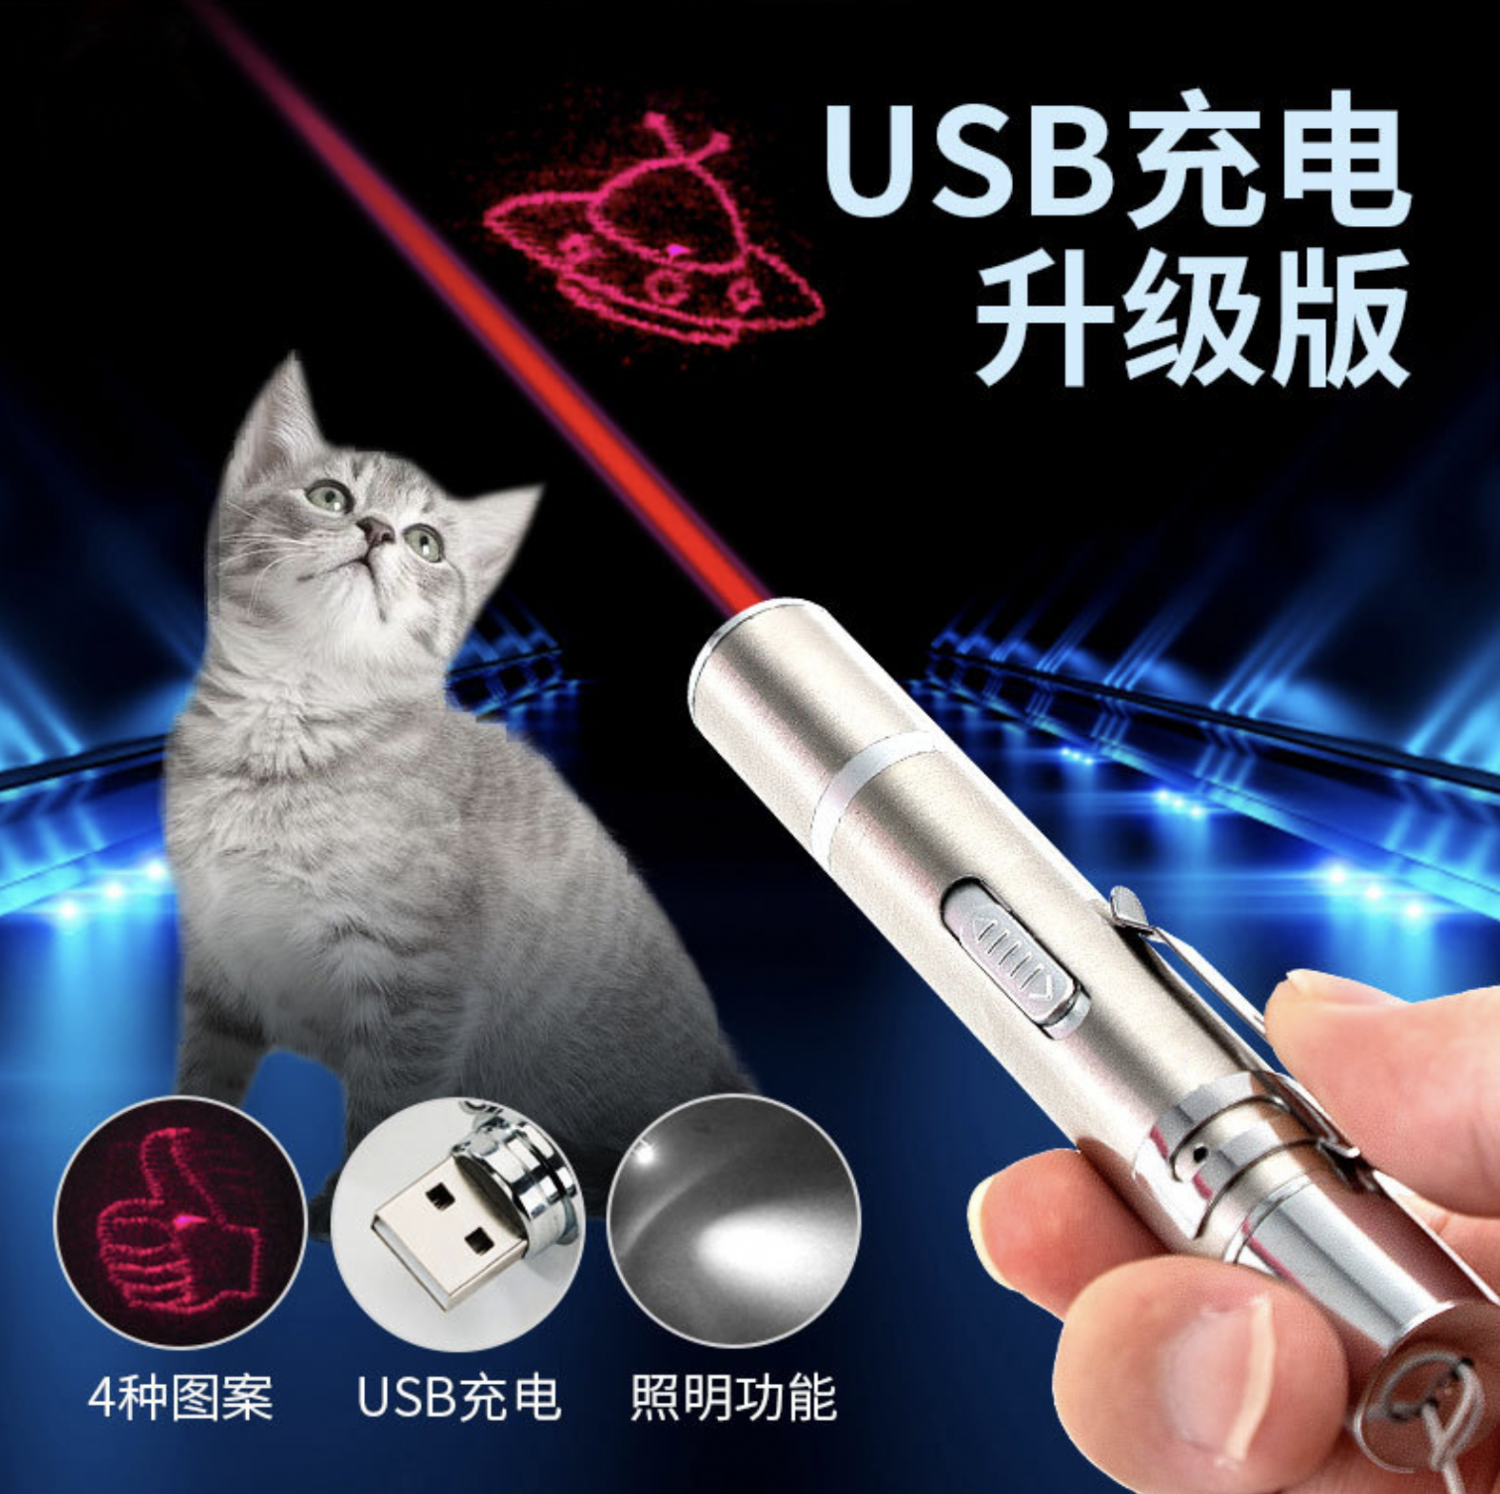 Laser pen/pointer with 4 pattern USB